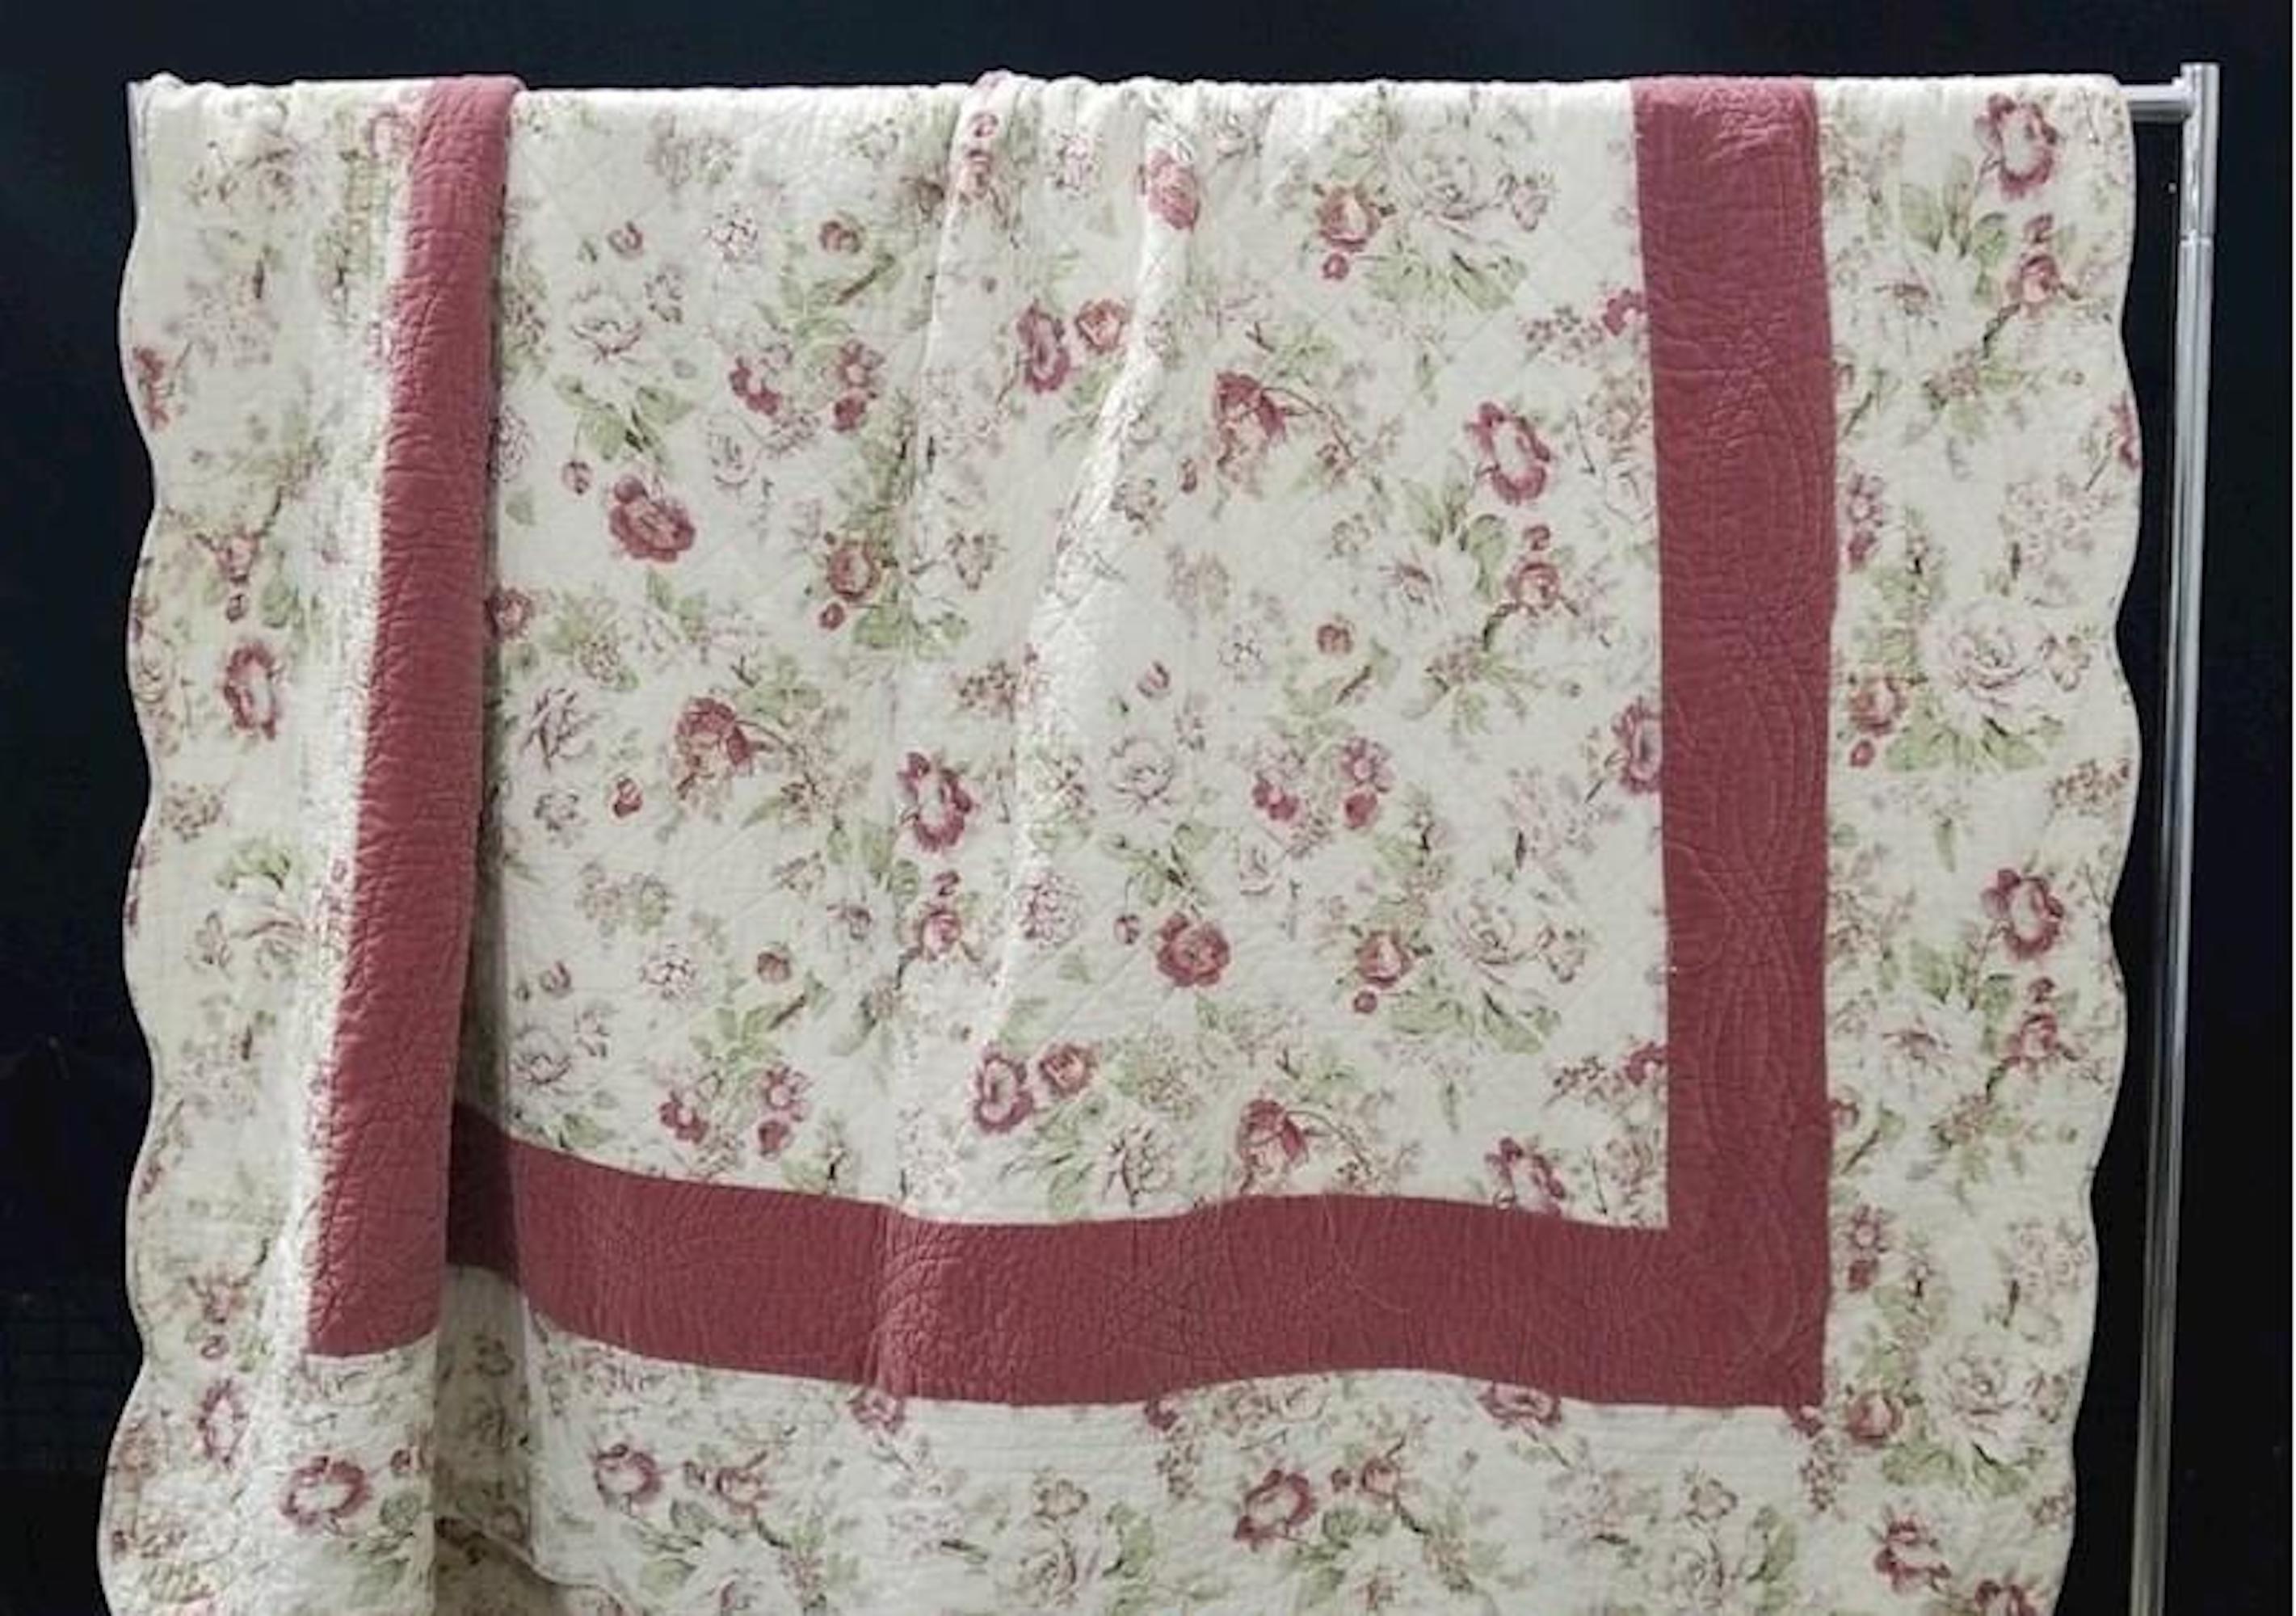 1993 Full or Double Machine-Stitched Pink Floral Roses Quilt (72\